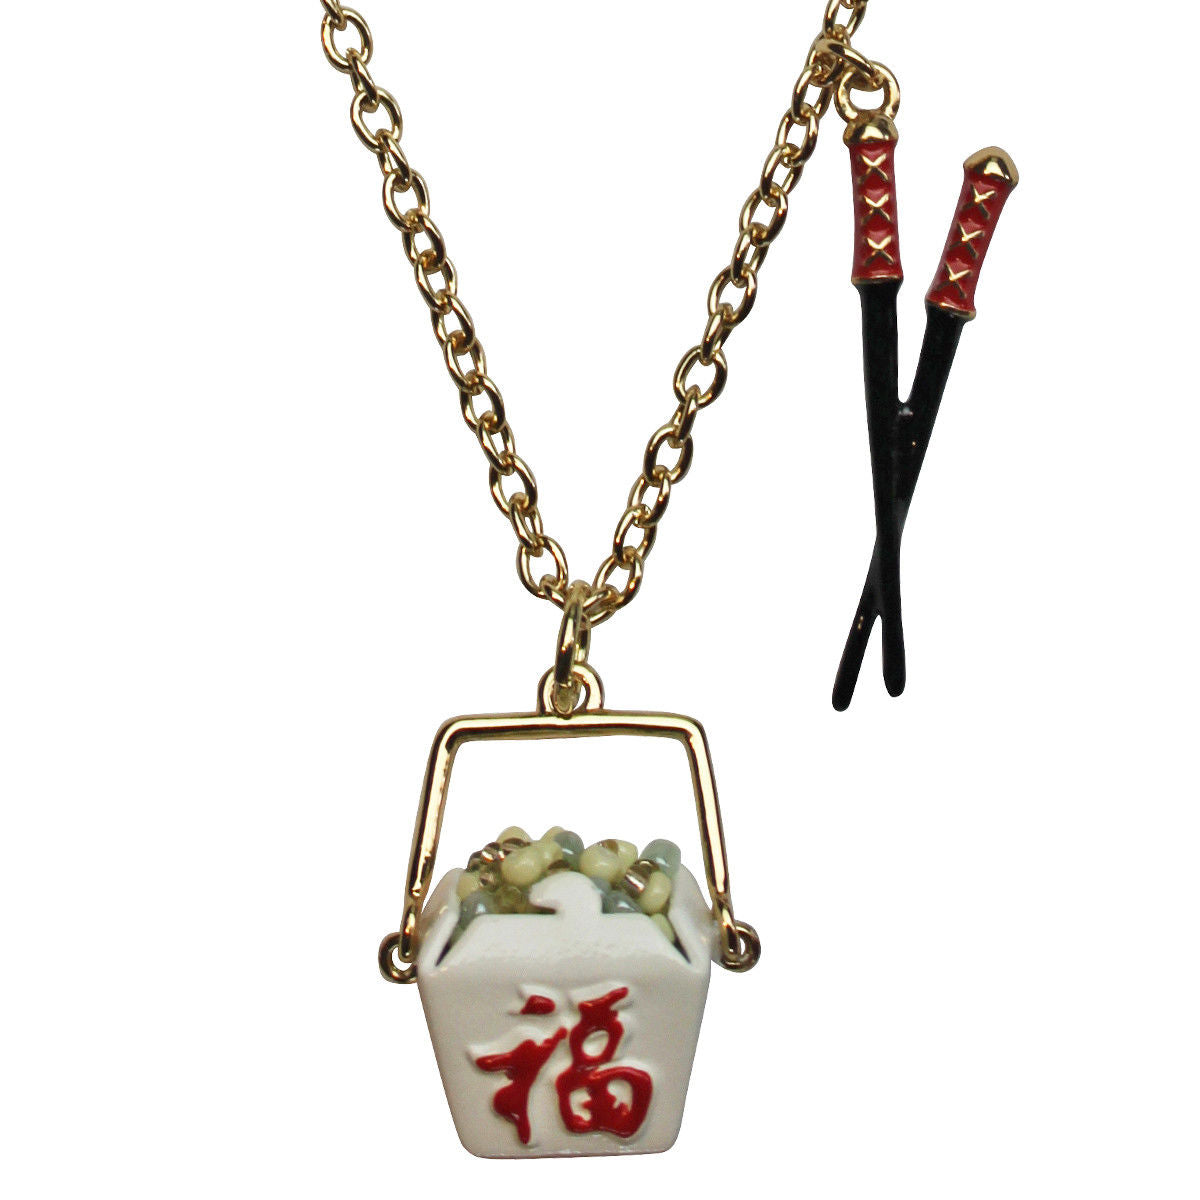 “Chinese To Go" Charm Necklace - Chinese Jewelry